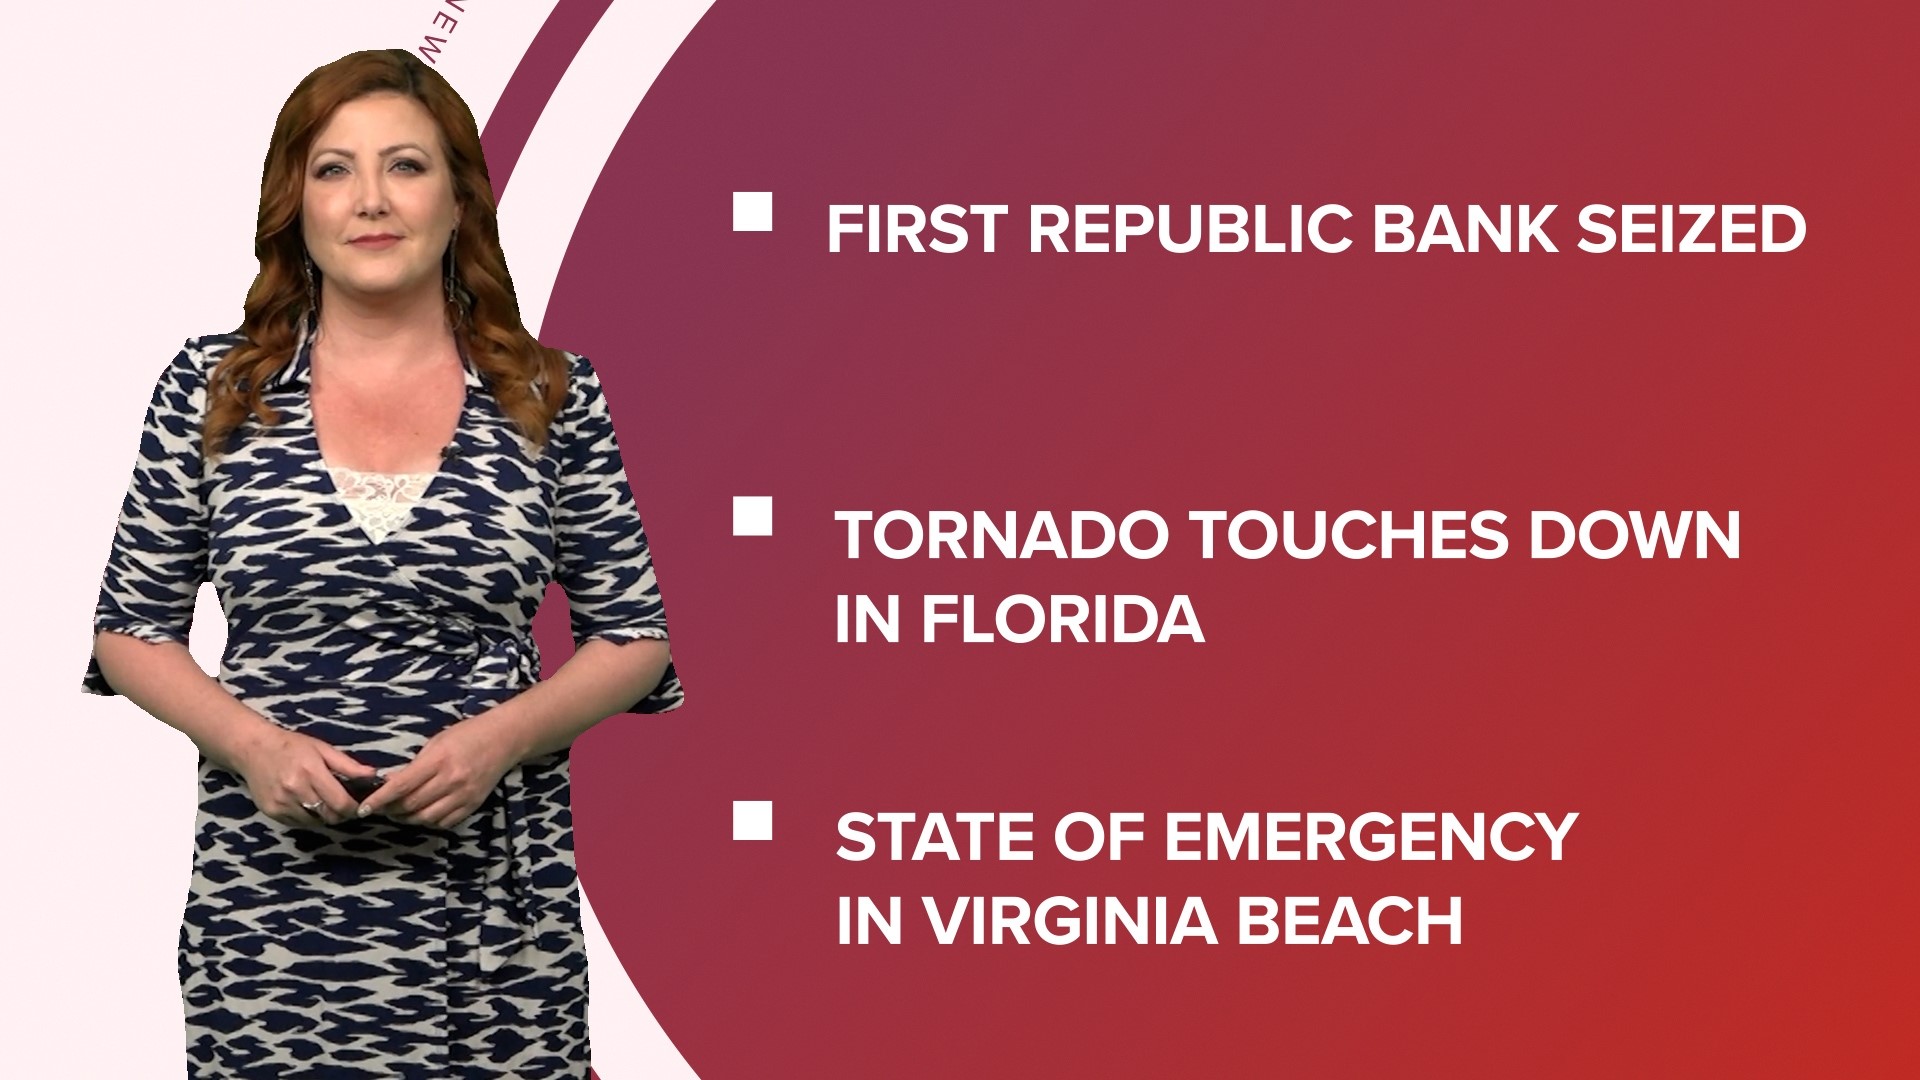 A look at what is happening in the news from tornadoes touching down in Florida and Virginia to First Republic Bank seized by federal agents.